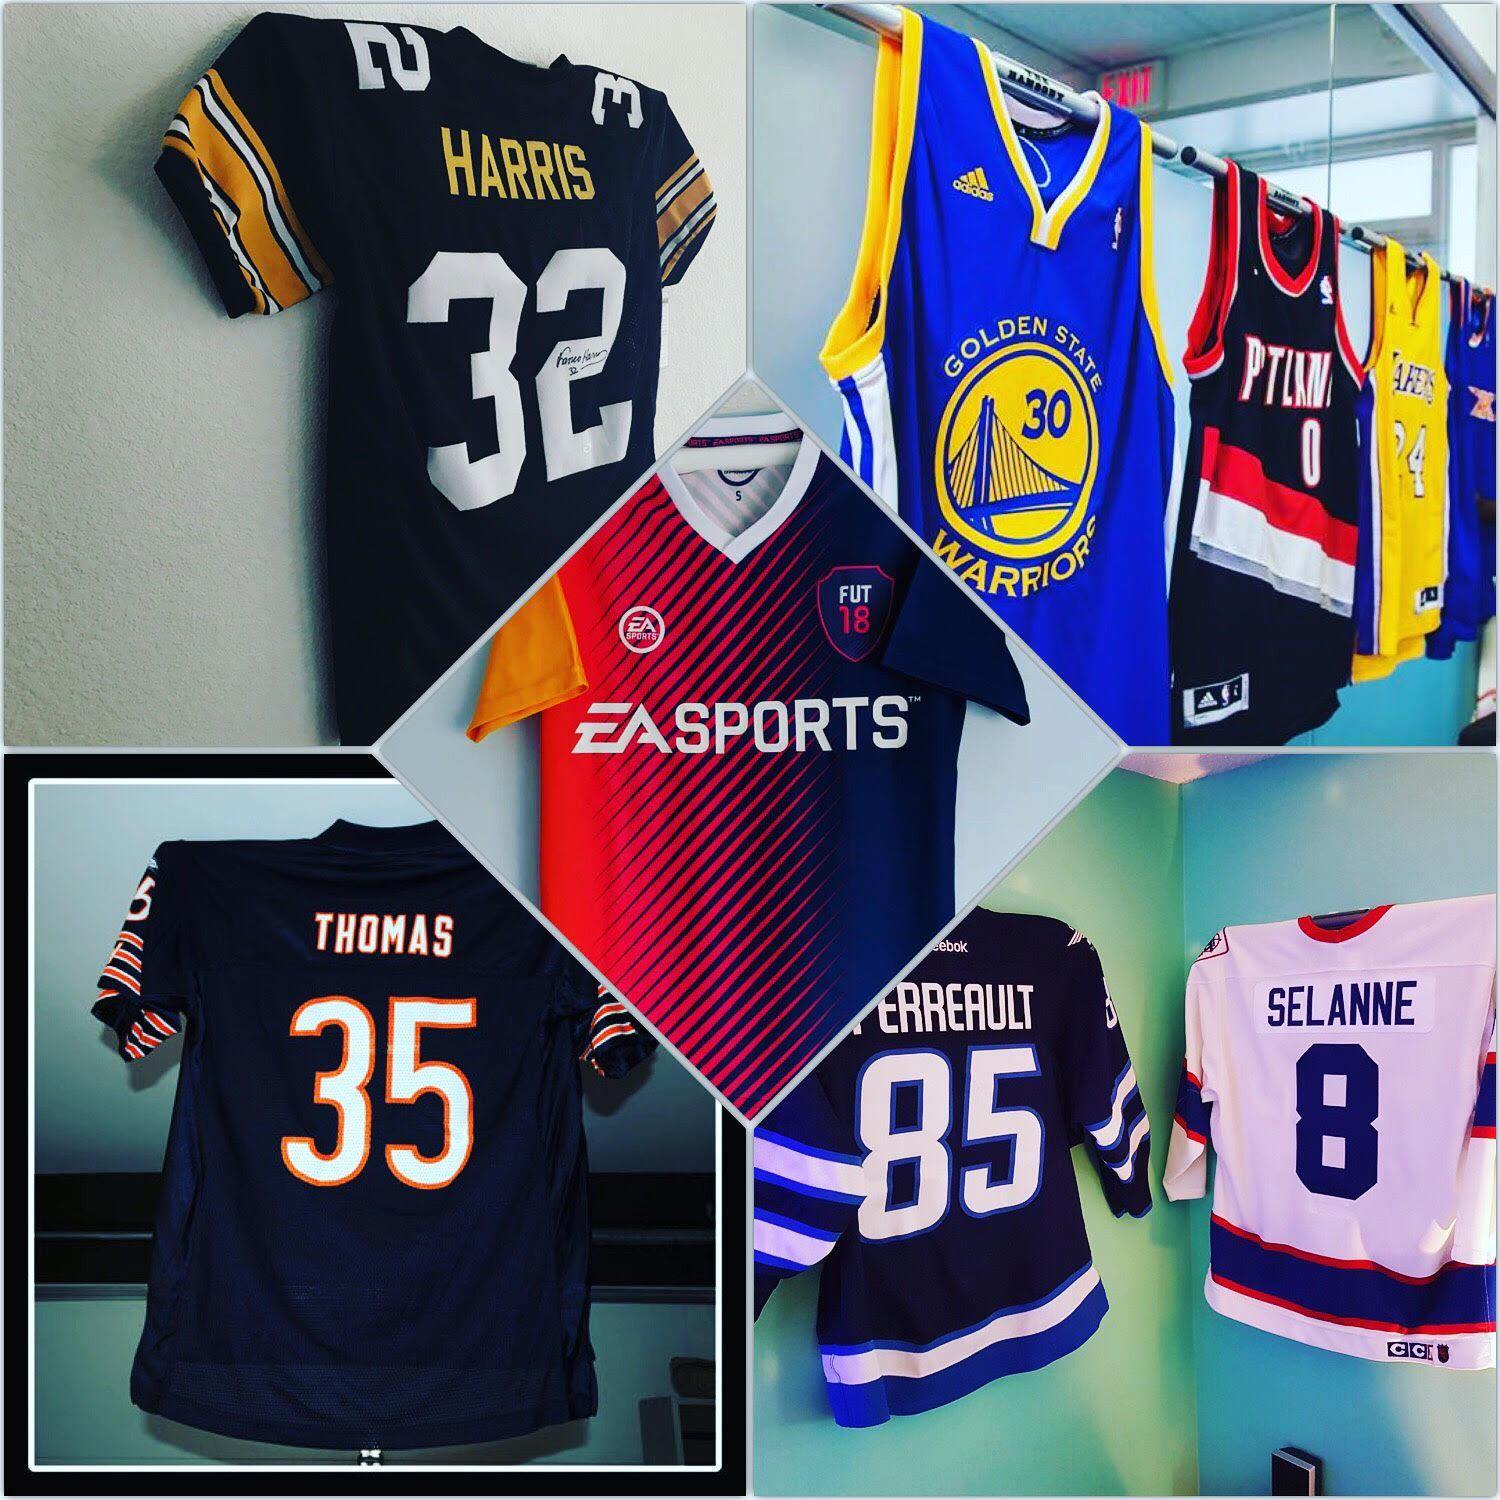 Jersey Mount Displays for everyone! - Sports Displays